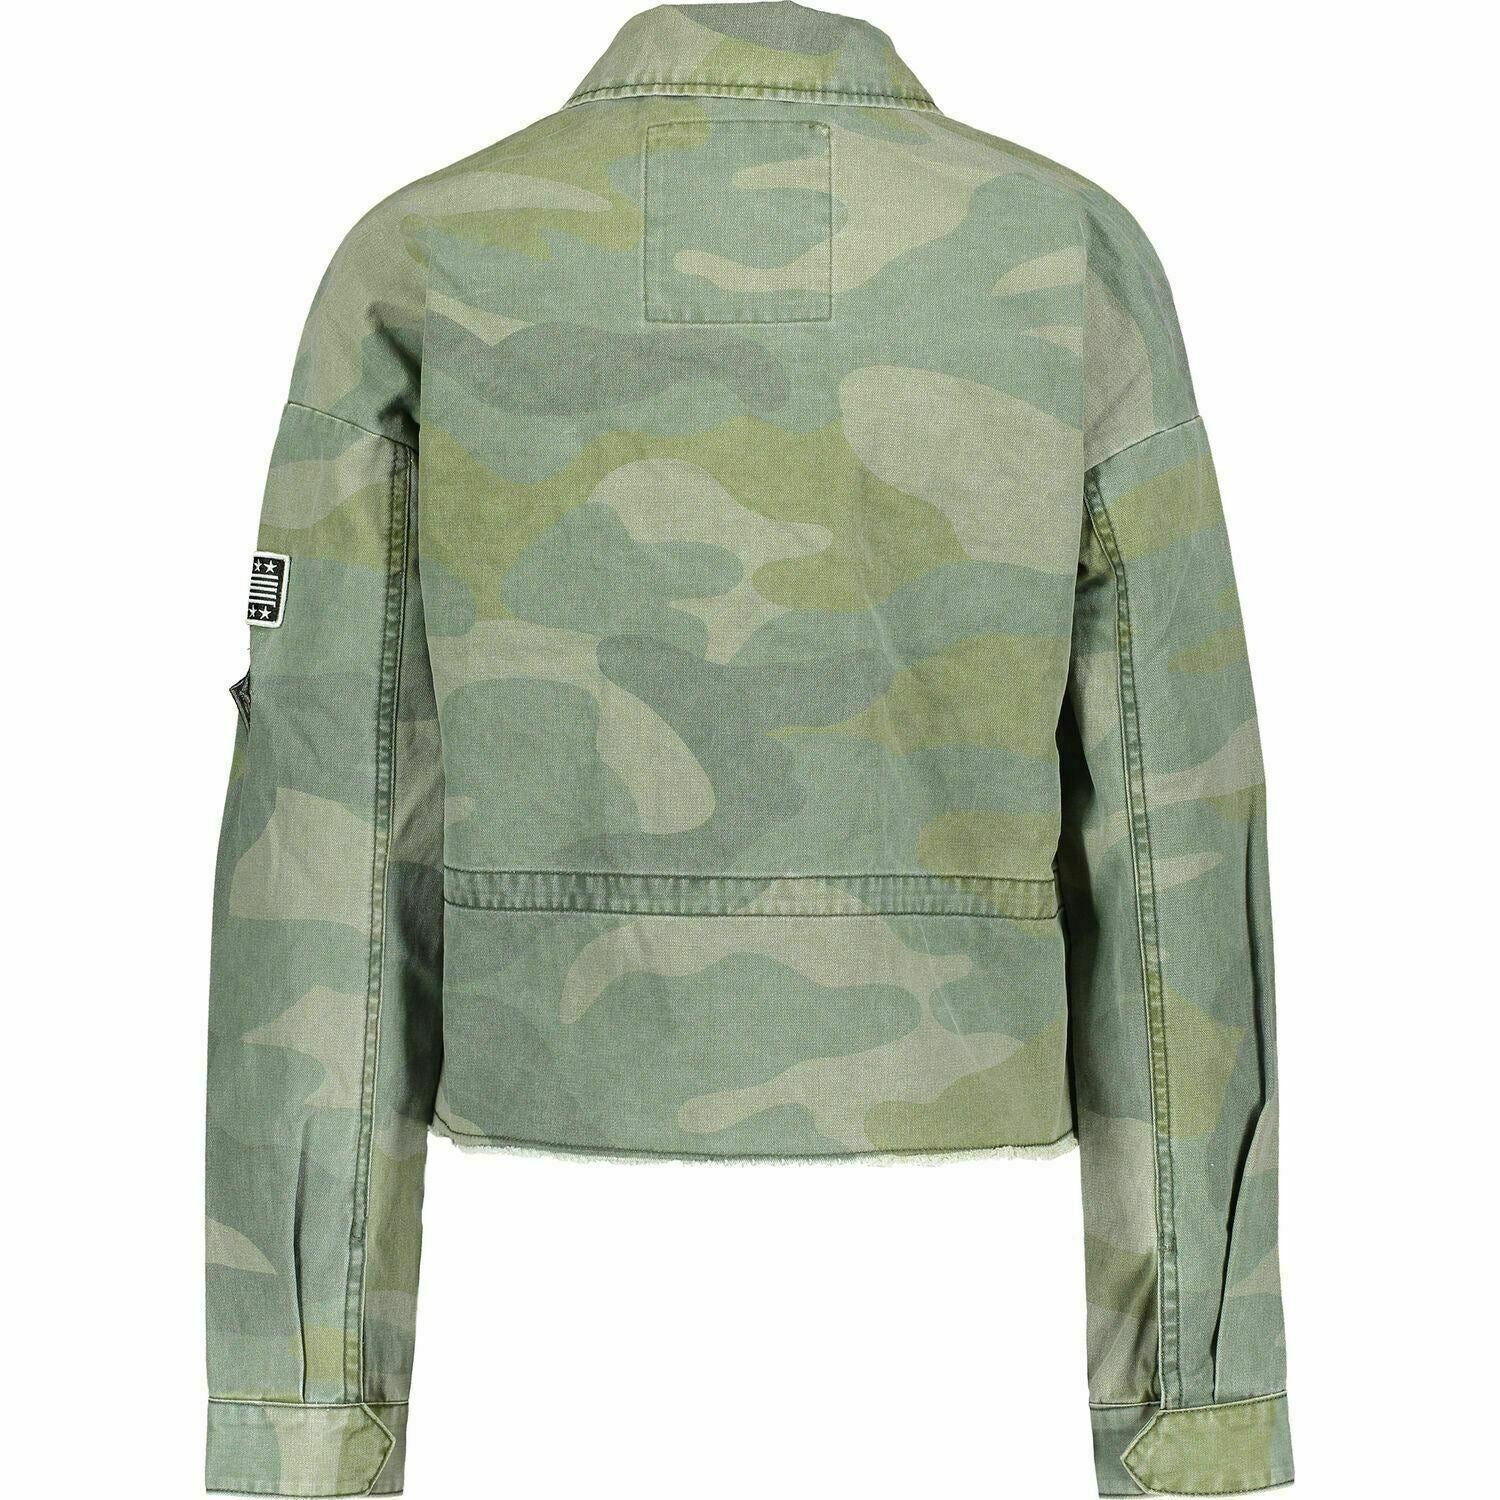 SUPERDRY Women's Crop Utility Jacket, Washed Green Camo, size L / UK 14